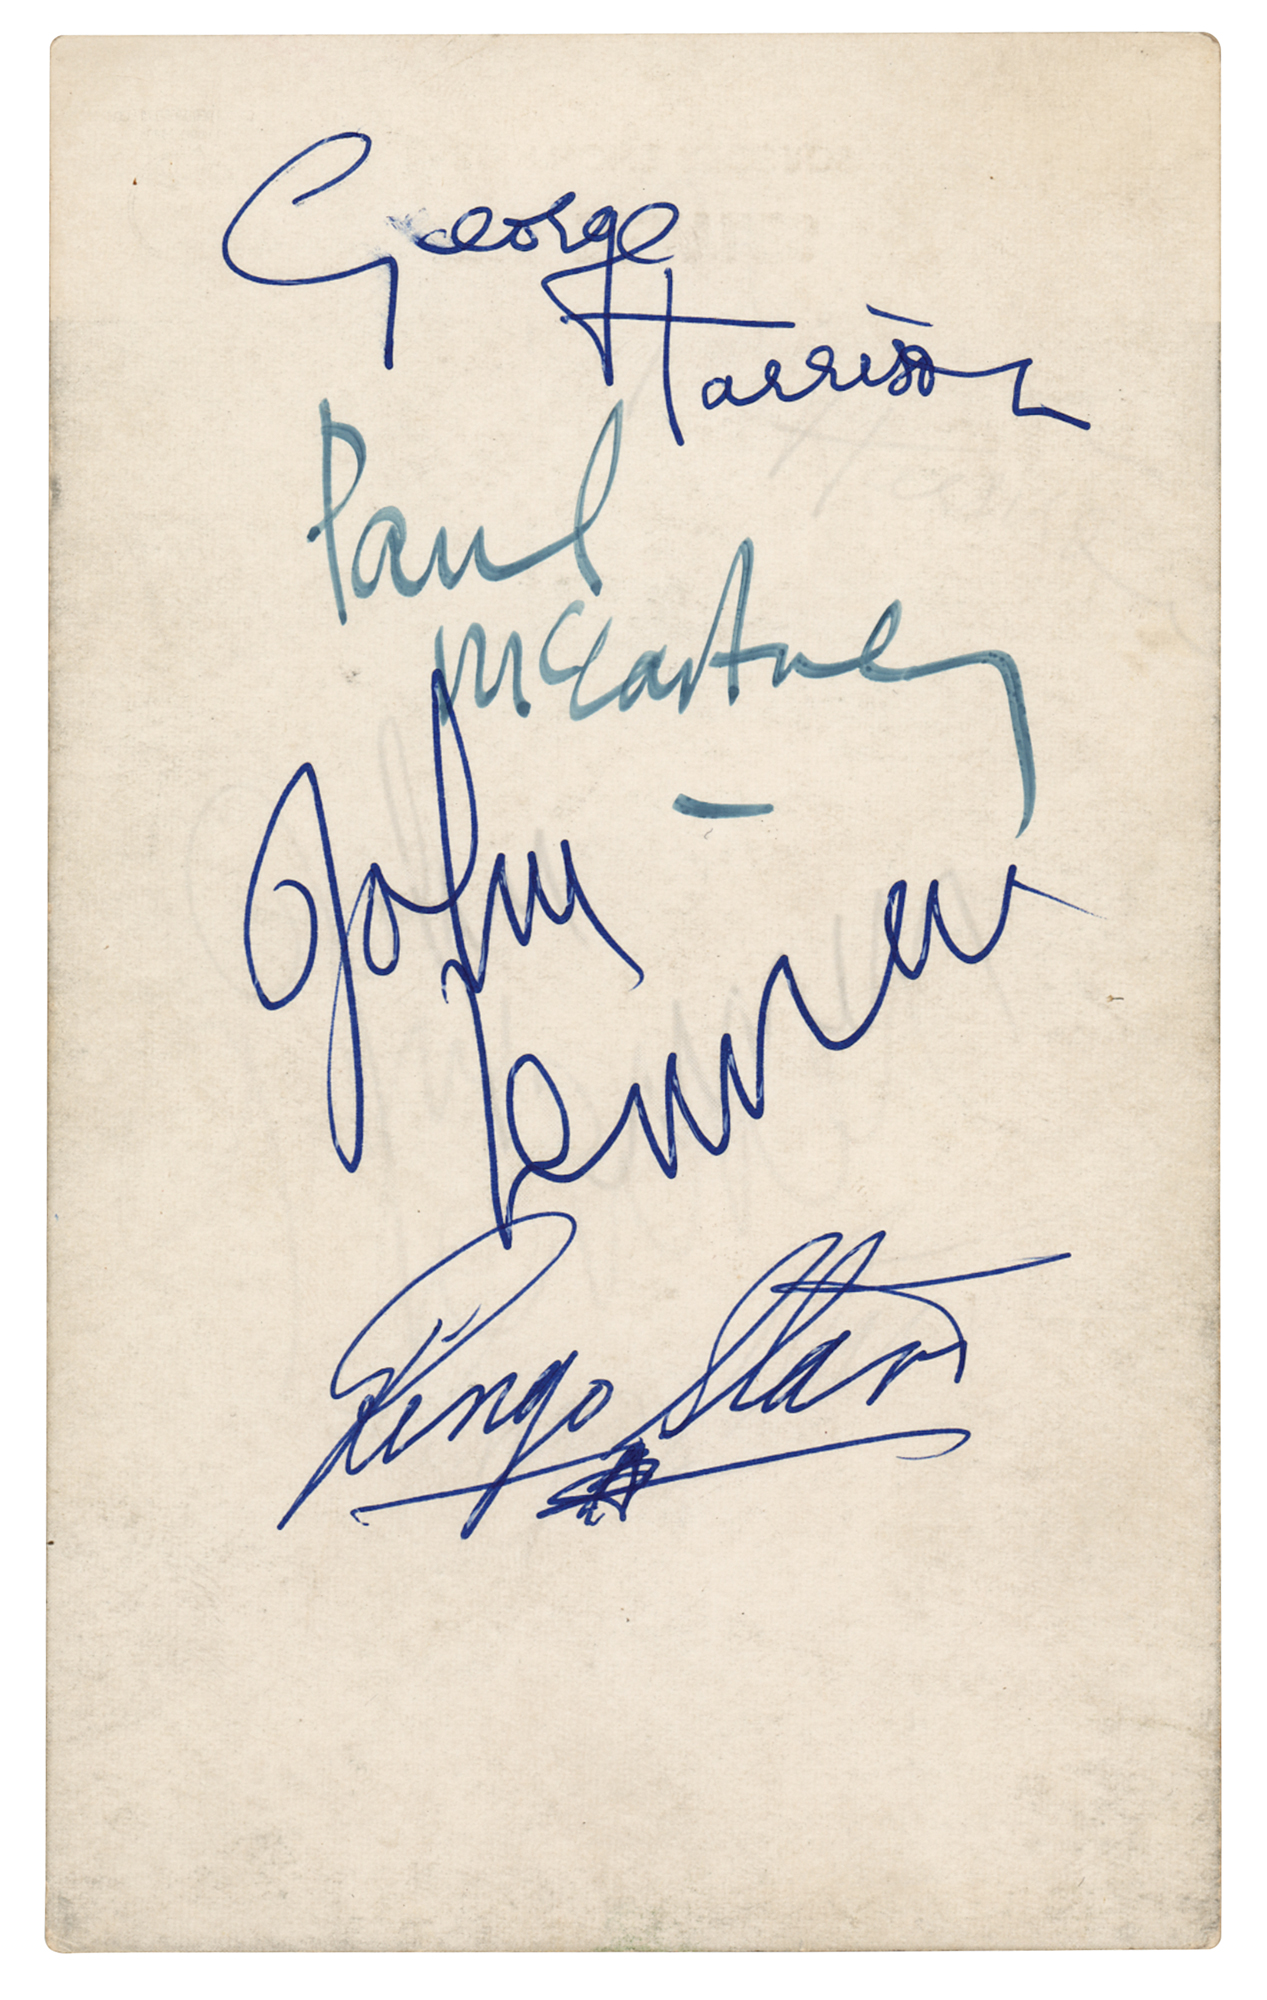 Lot #2001 Beatles Signed Promo Card